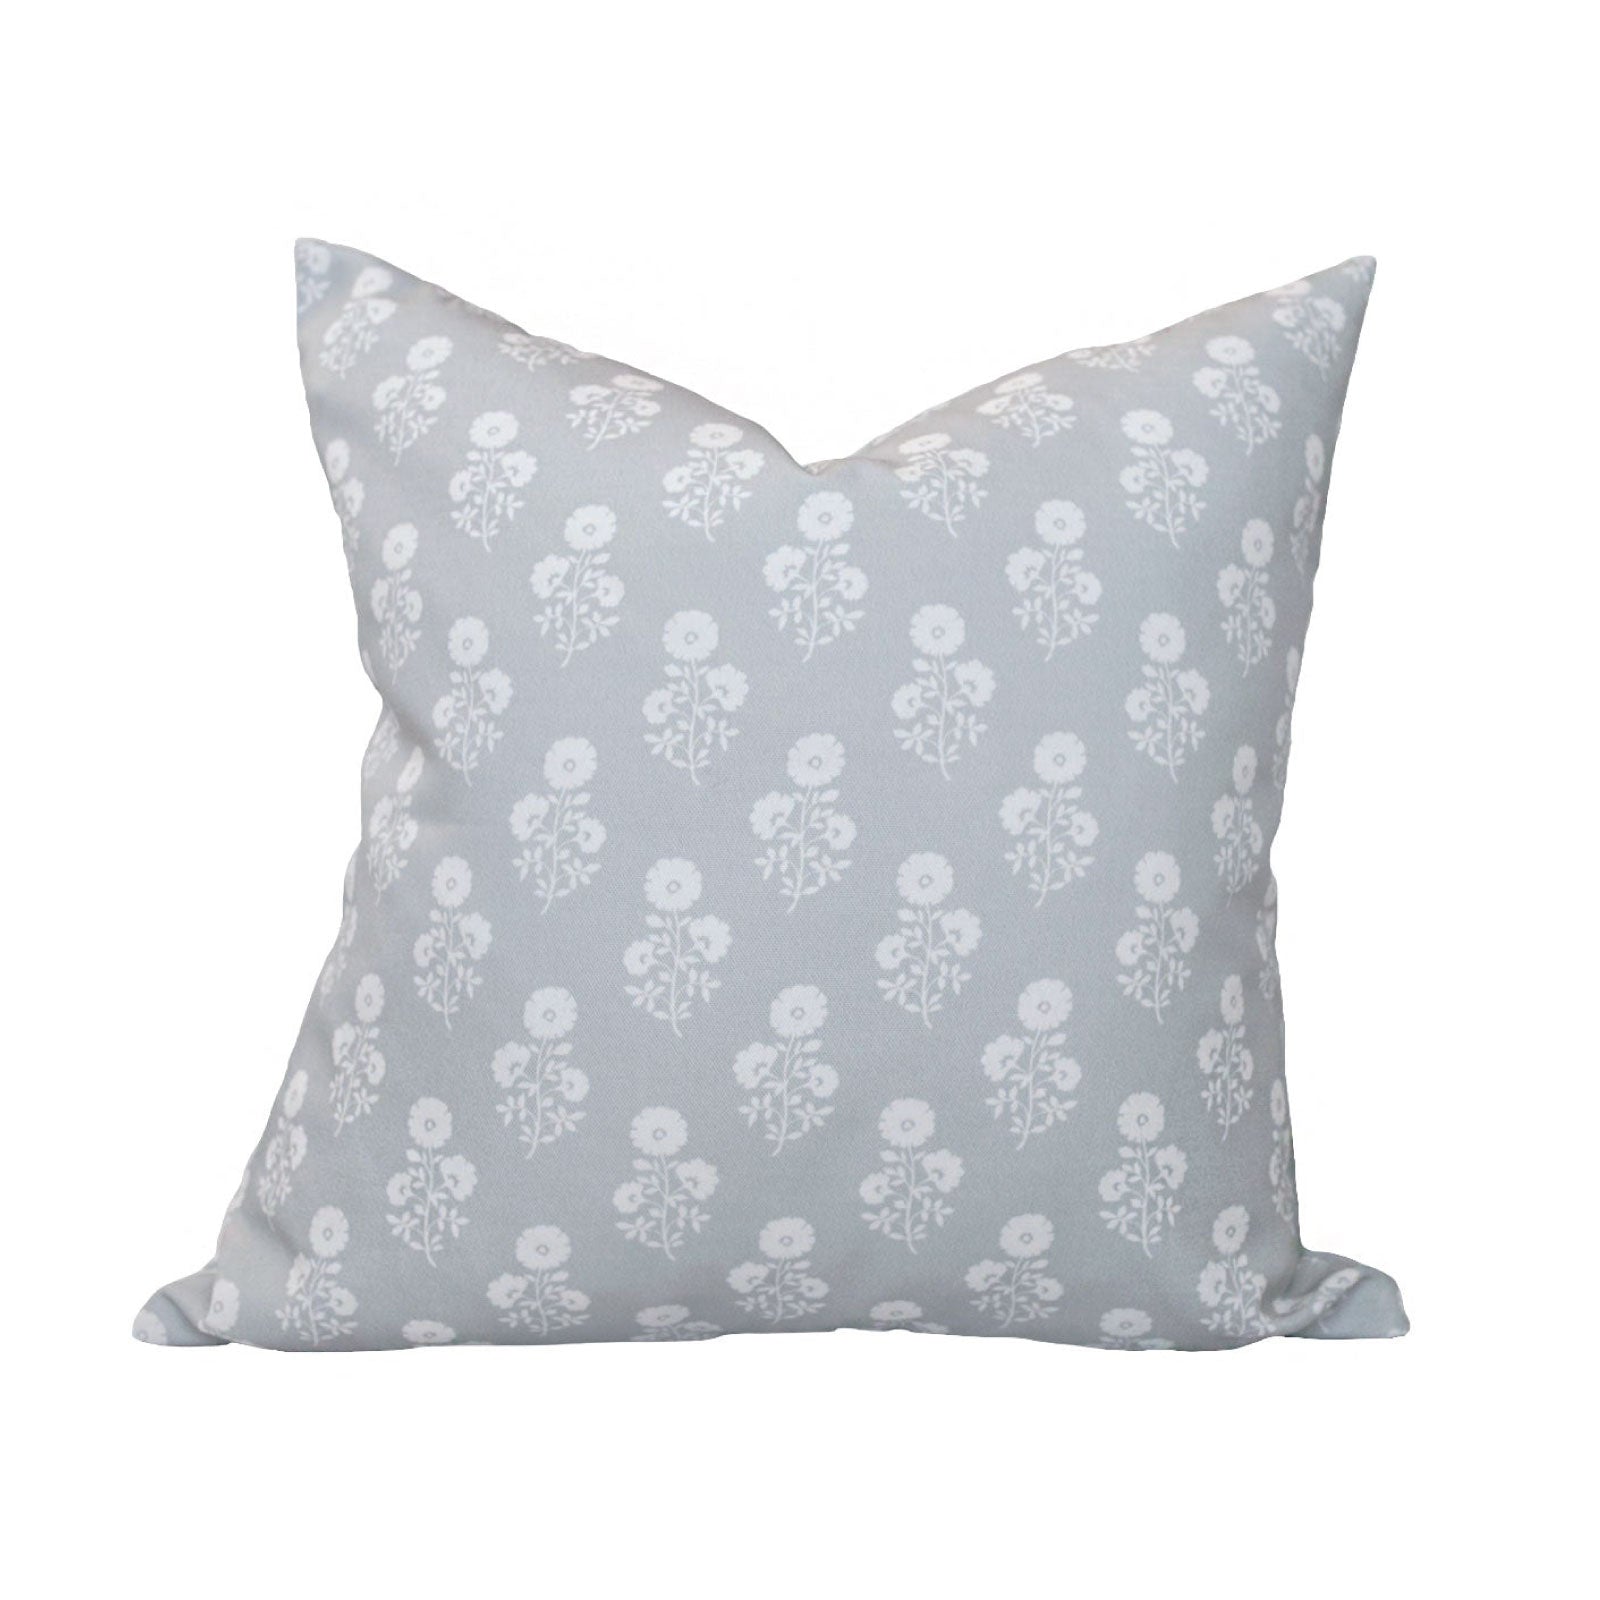 Julia Floral Pillow in Stone Grey